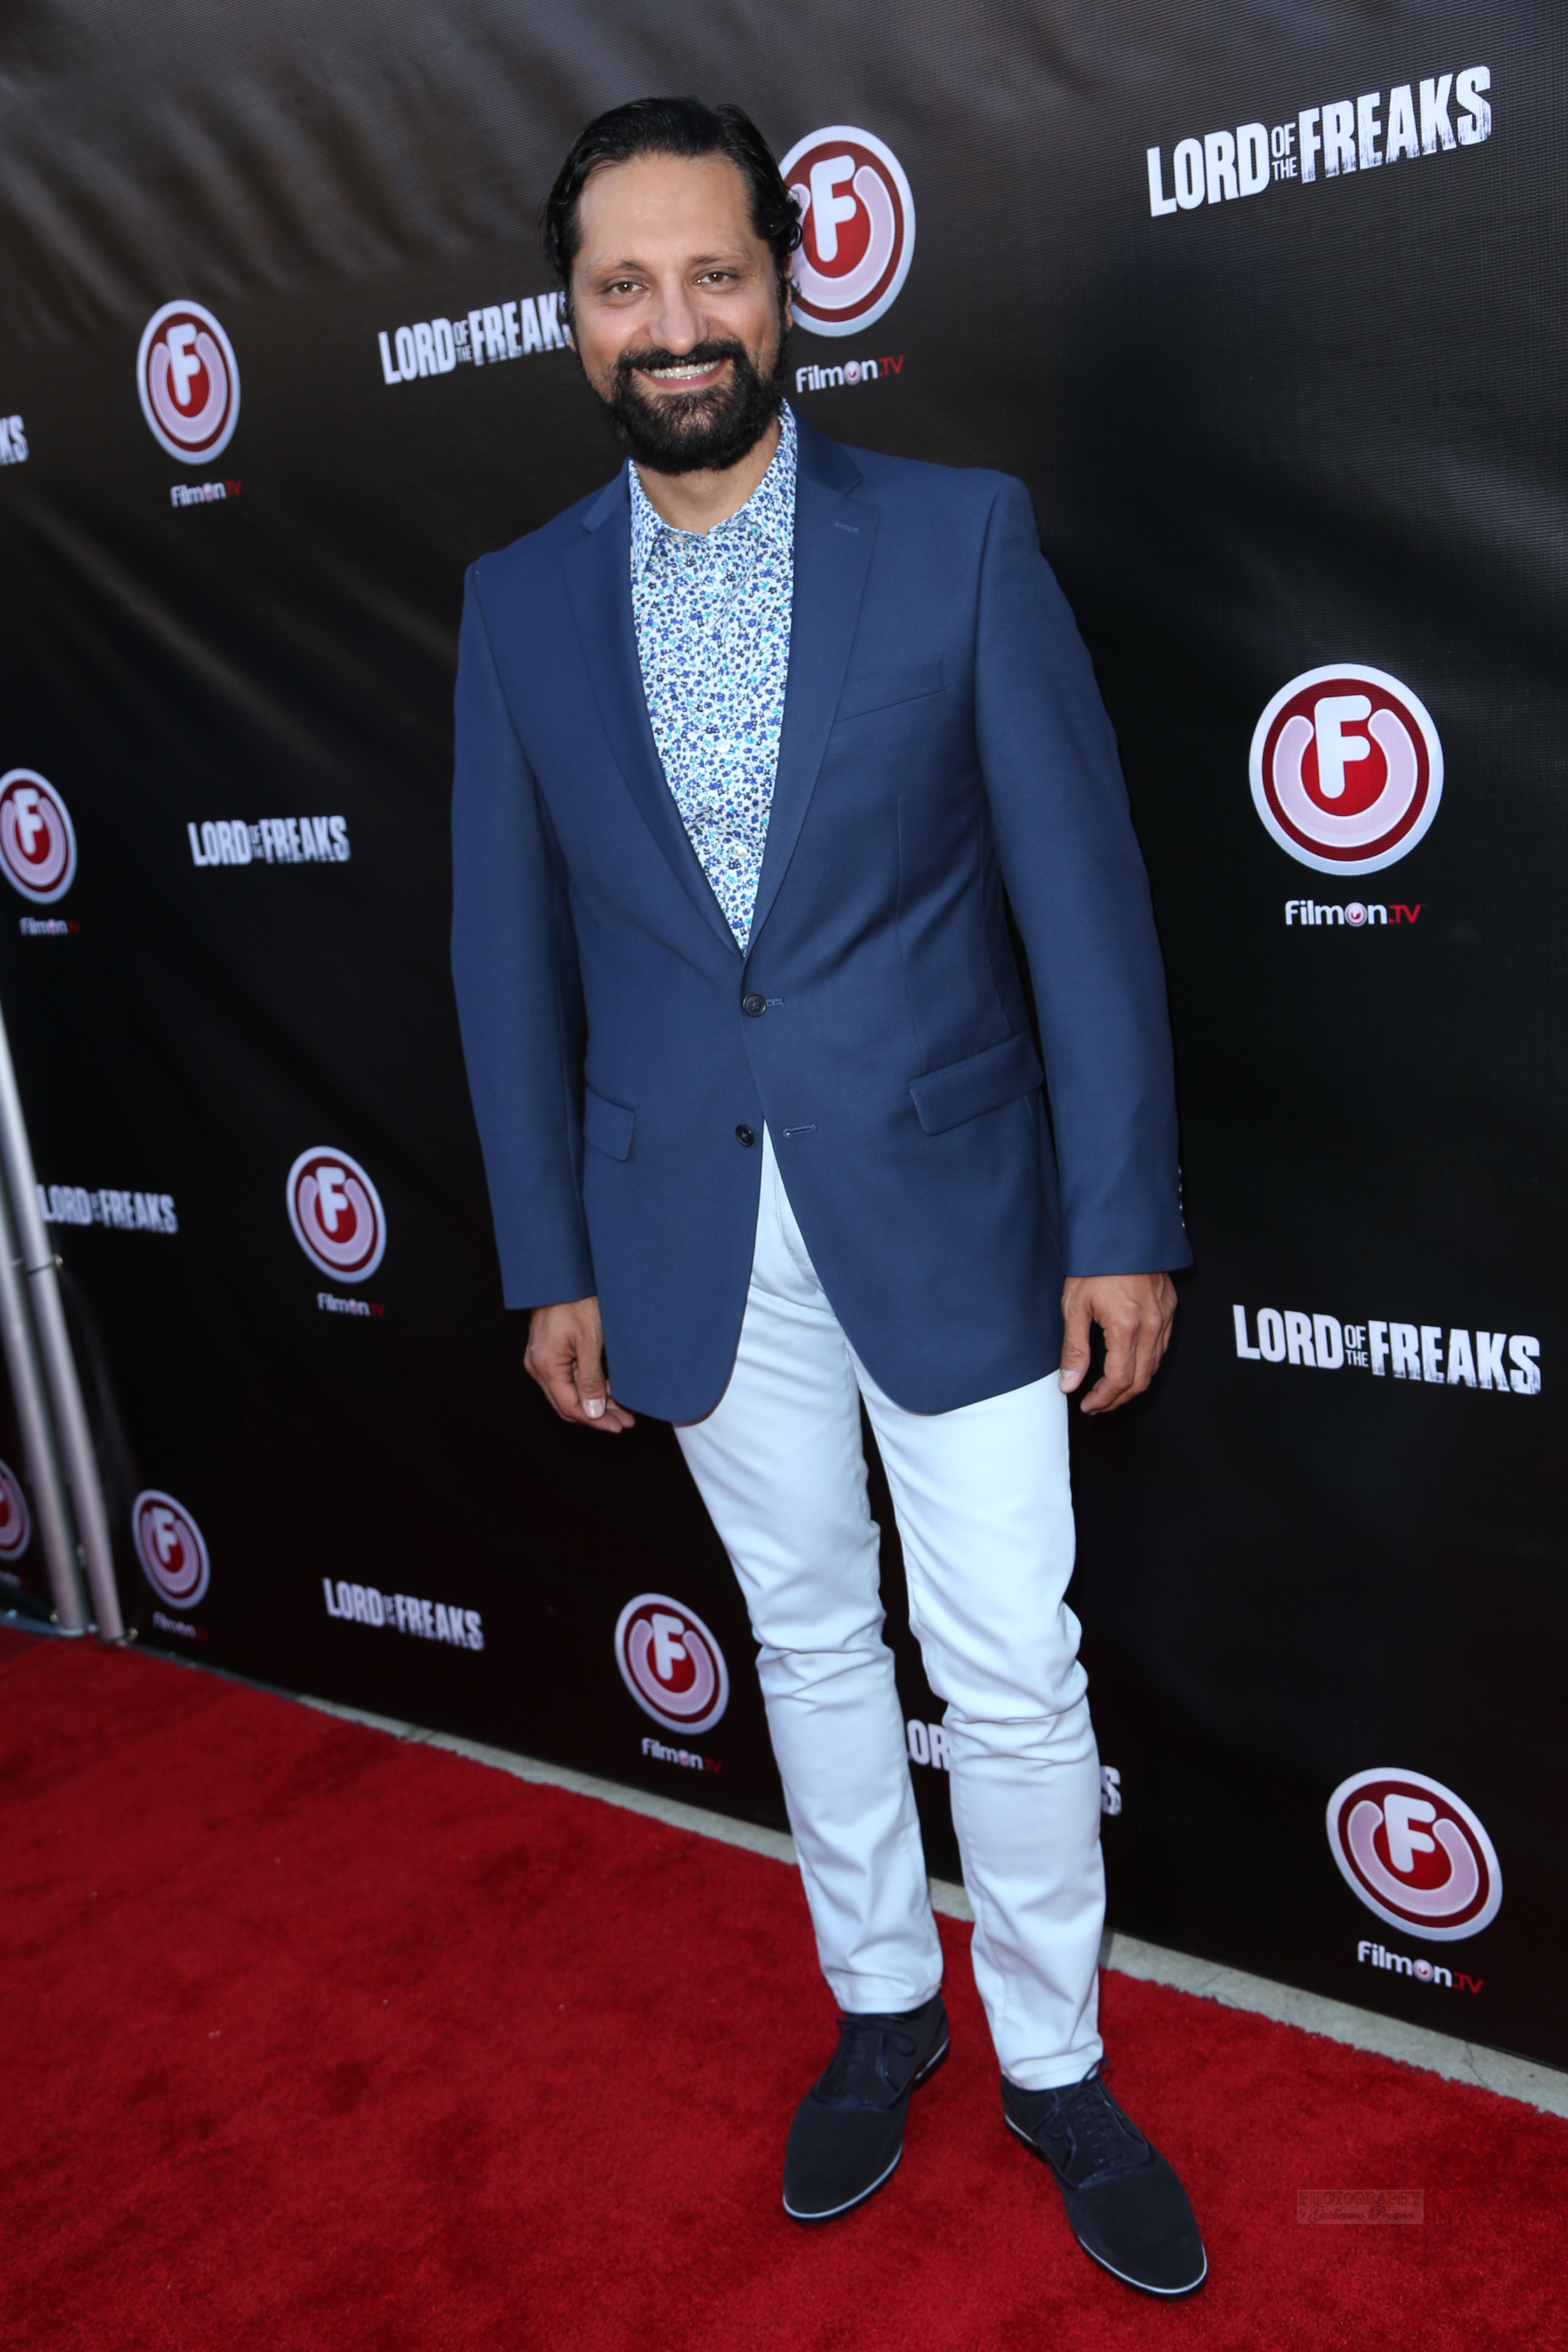 Danny Boushebel attends David Alki's 'Lord Of The Freaks' Red Carpet Premiere in Hollywood on 6/29/2015.